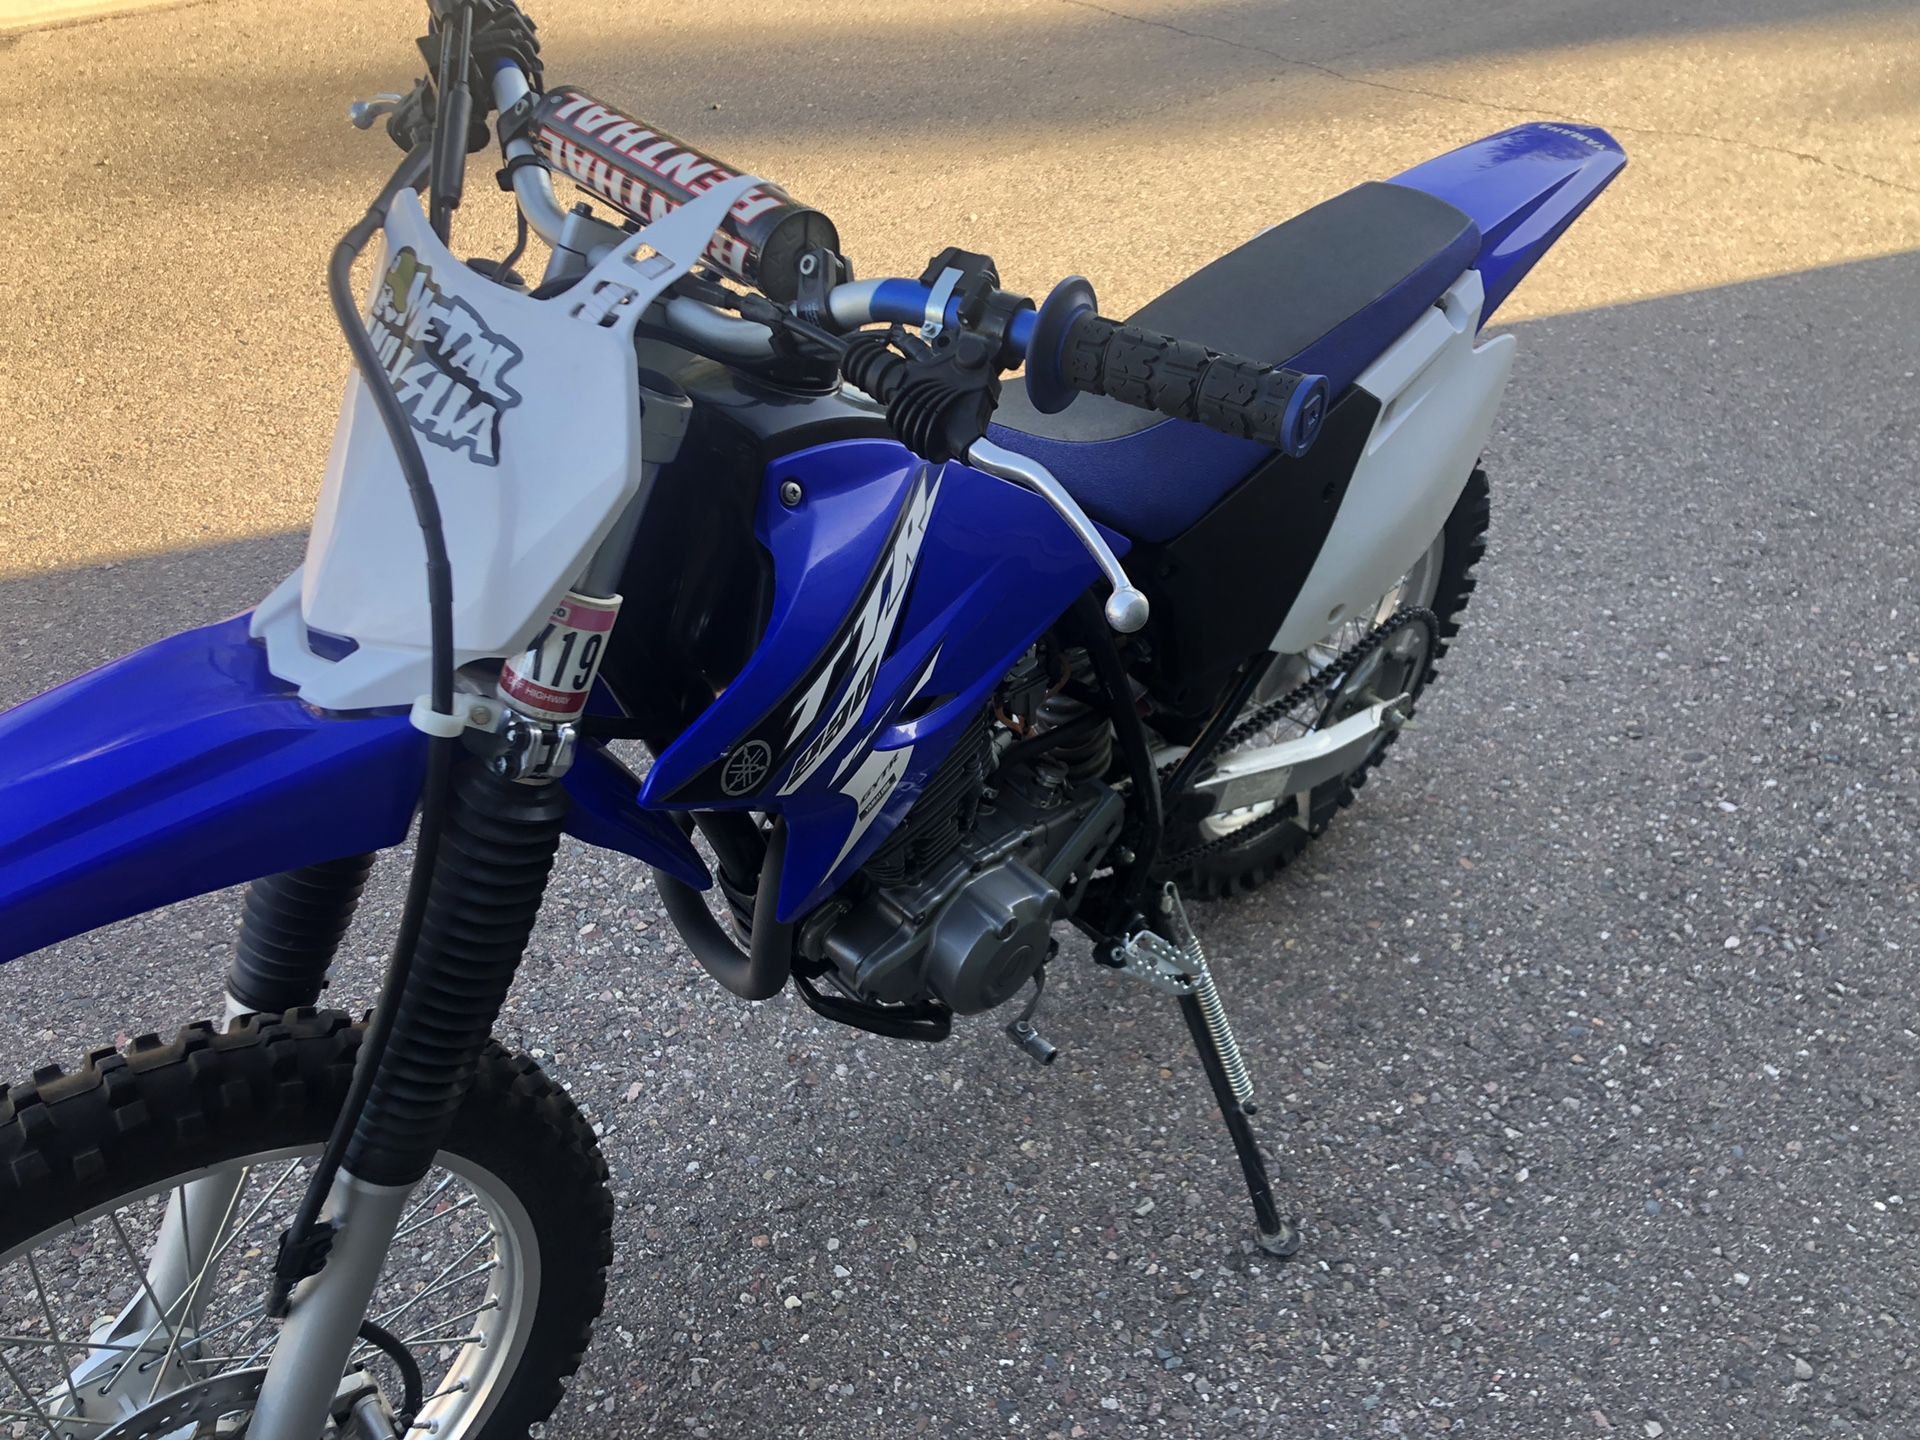 Yamaha TTR 230 and gear for sale